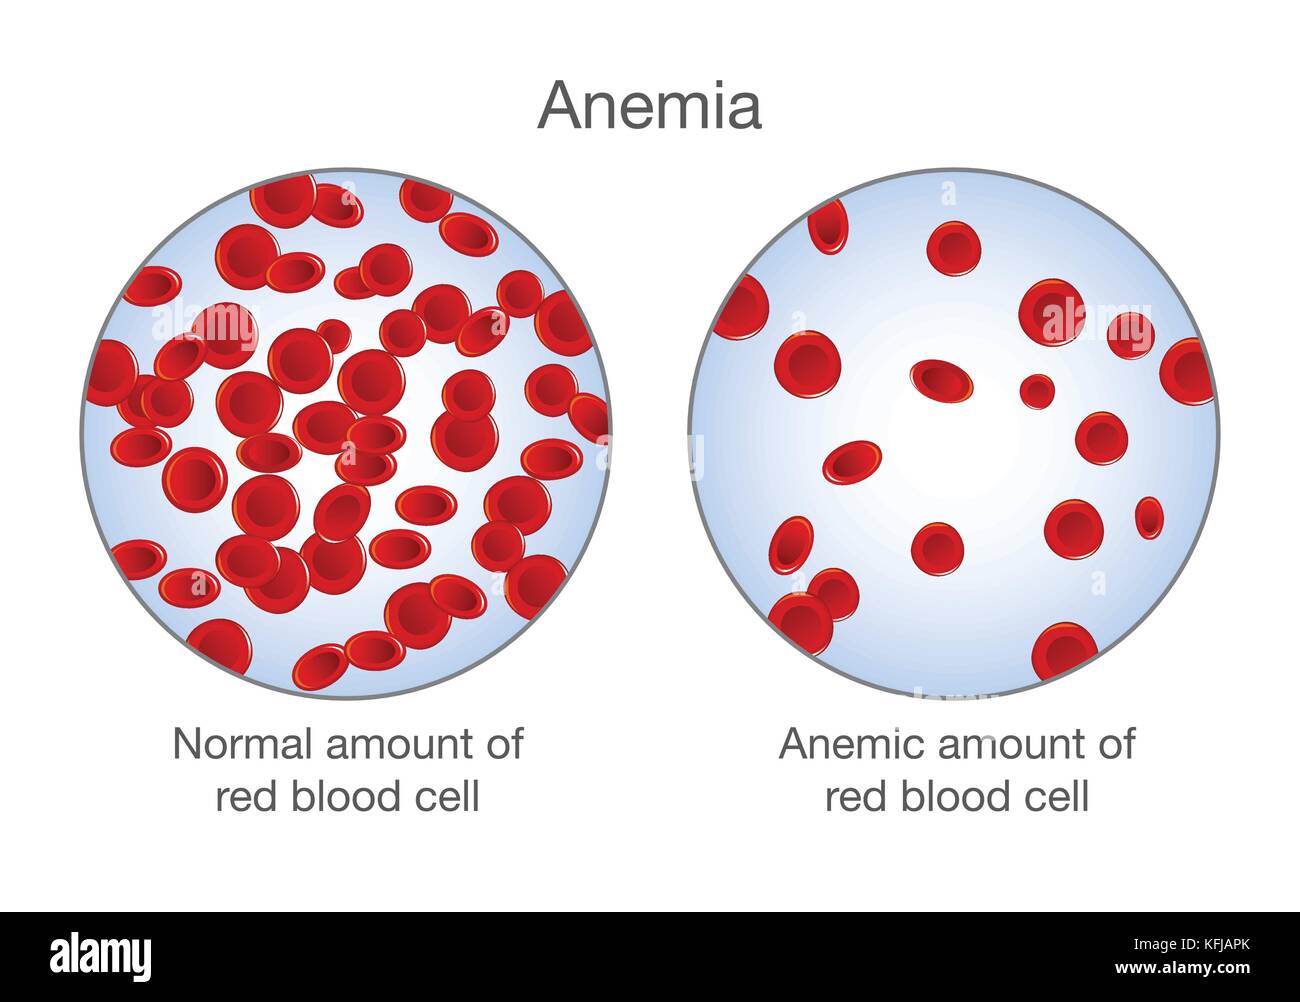 The difference of Anemia amount of red blood cell and normal. Stock Vector